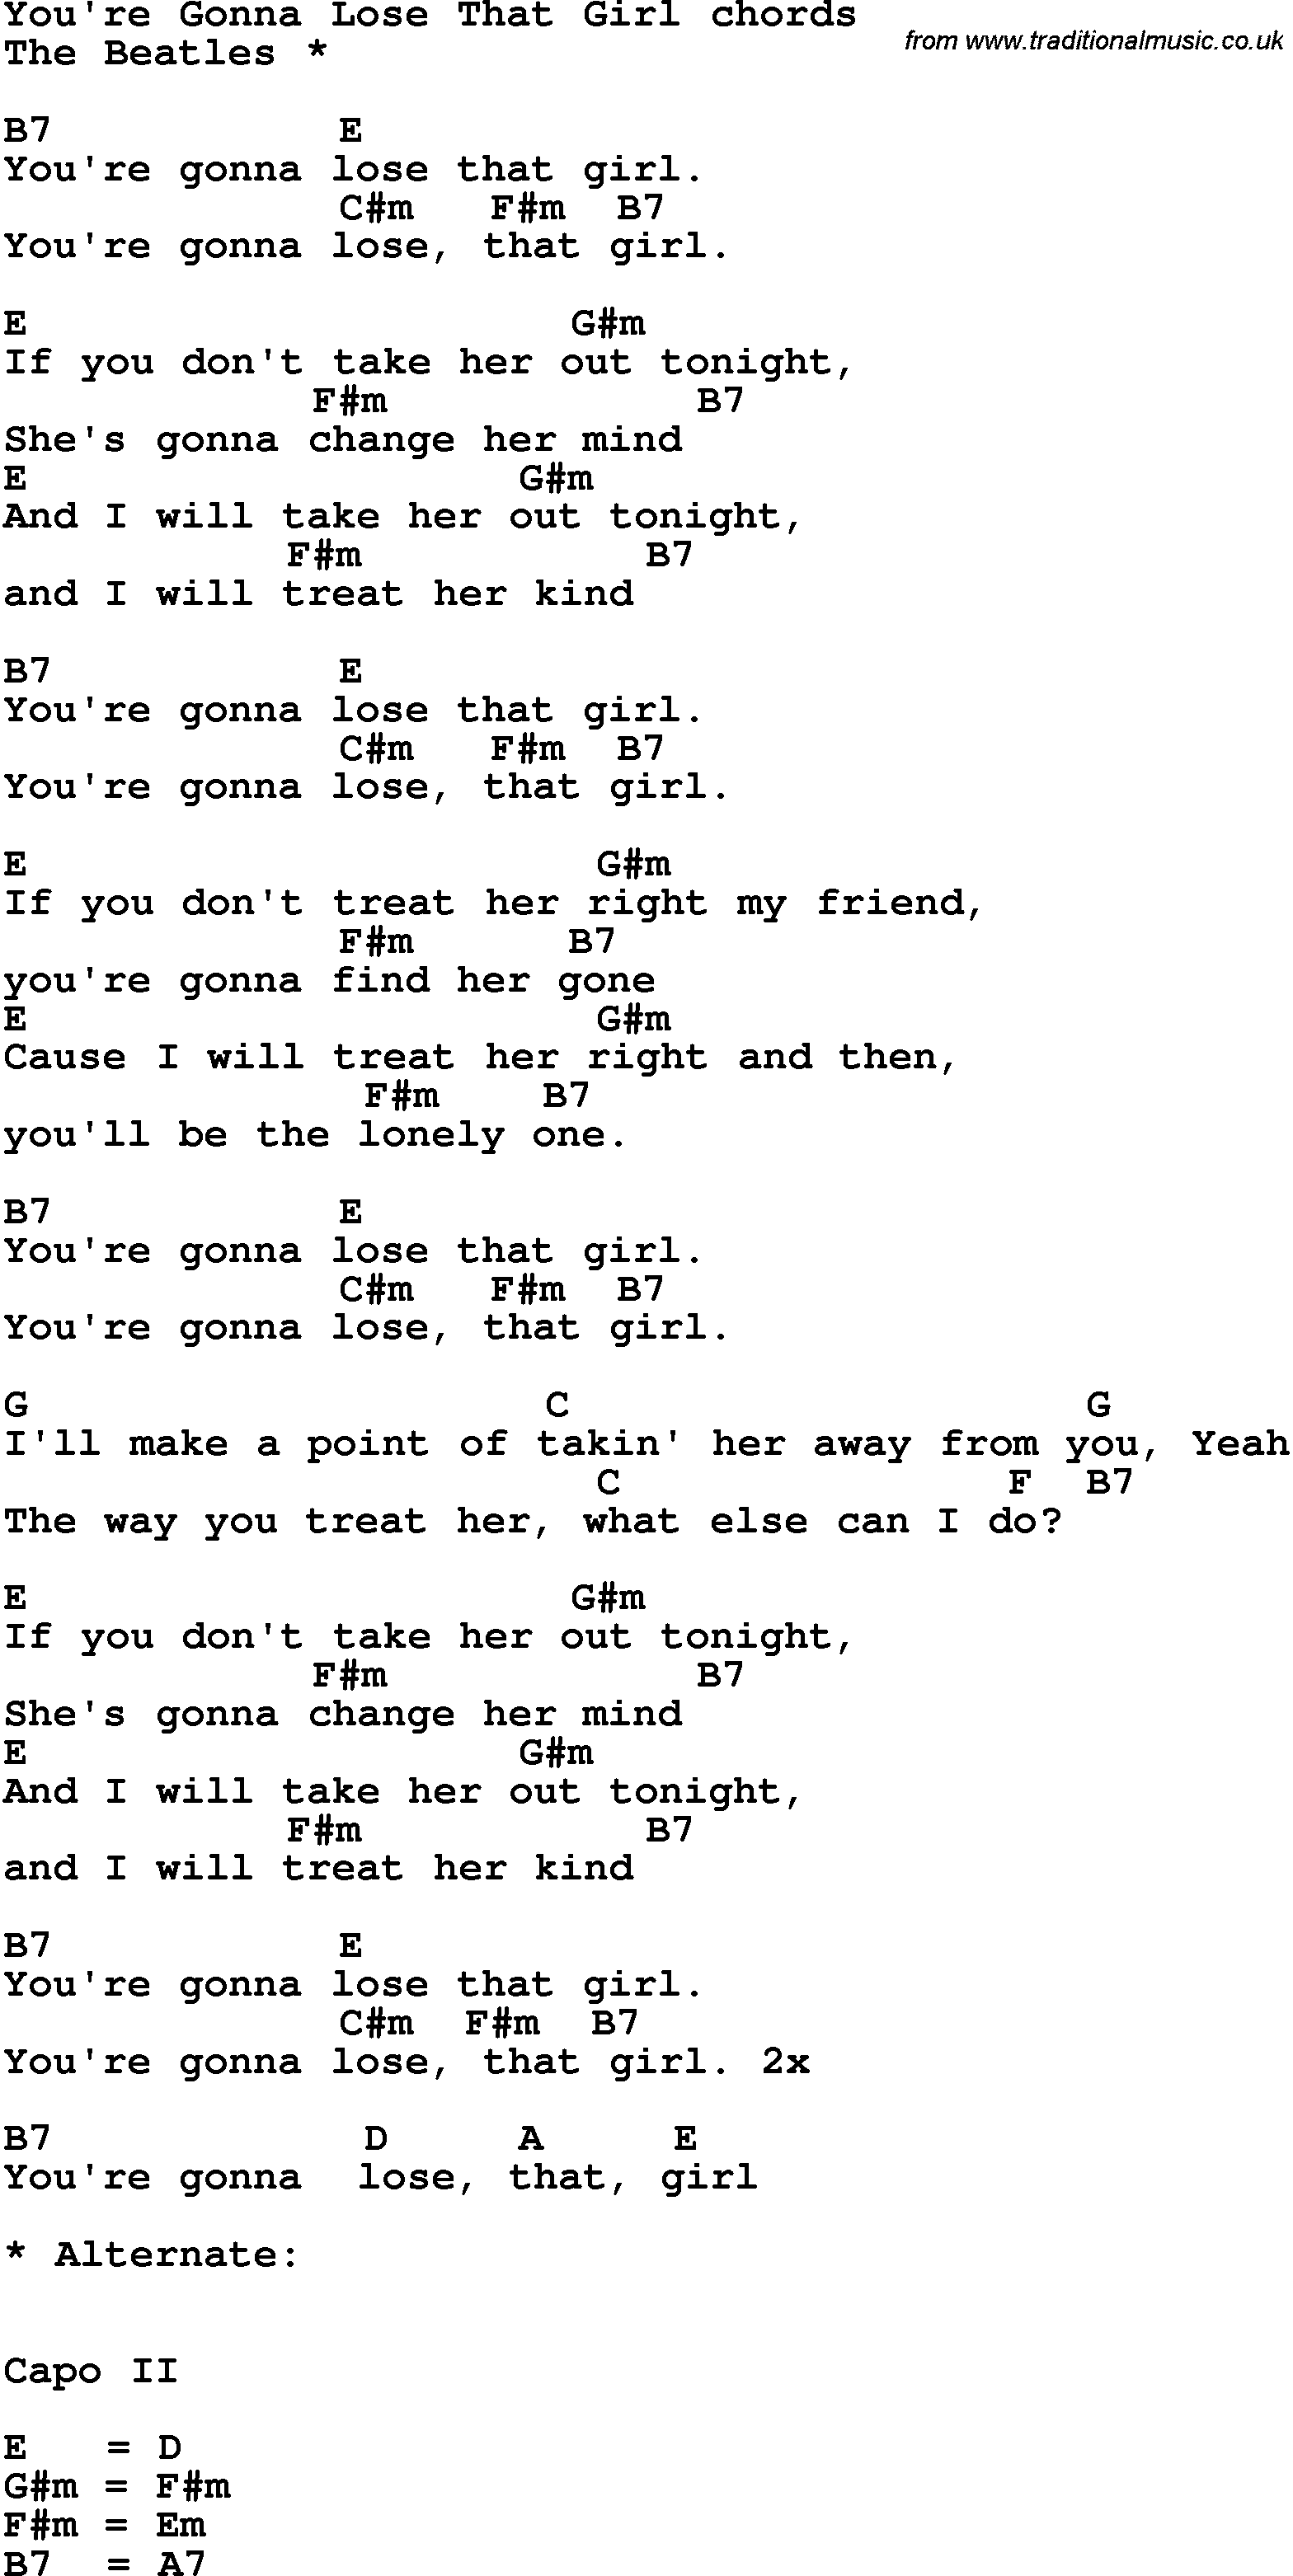 Song Lyrics with guitar chords for You're Gonna Lose That Girl